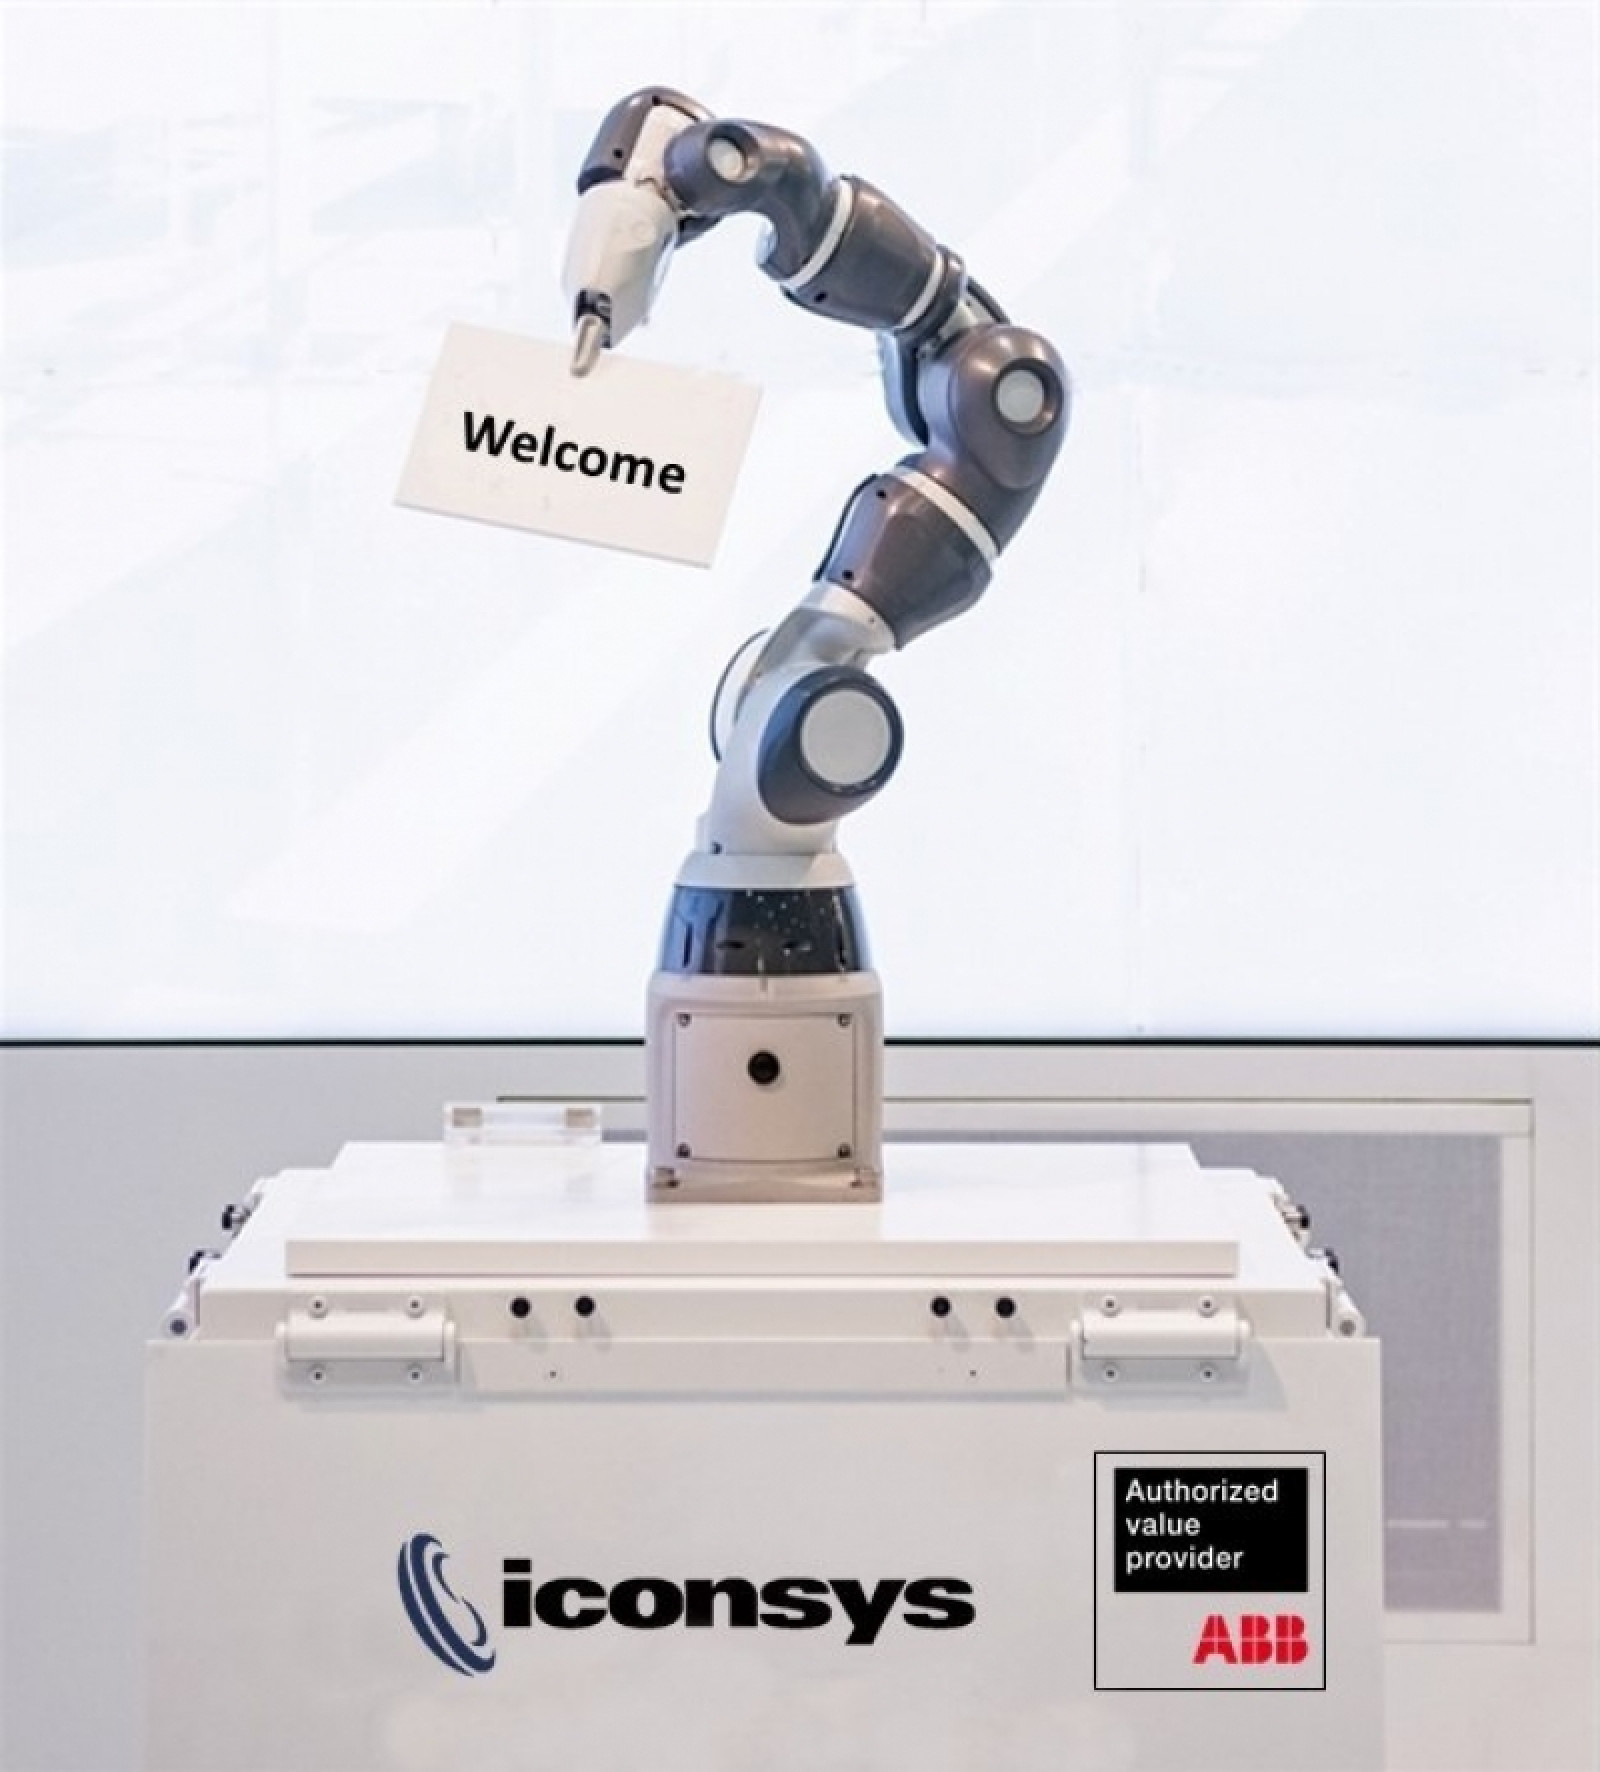 ICONSYS appointed as an ABB robotic partner